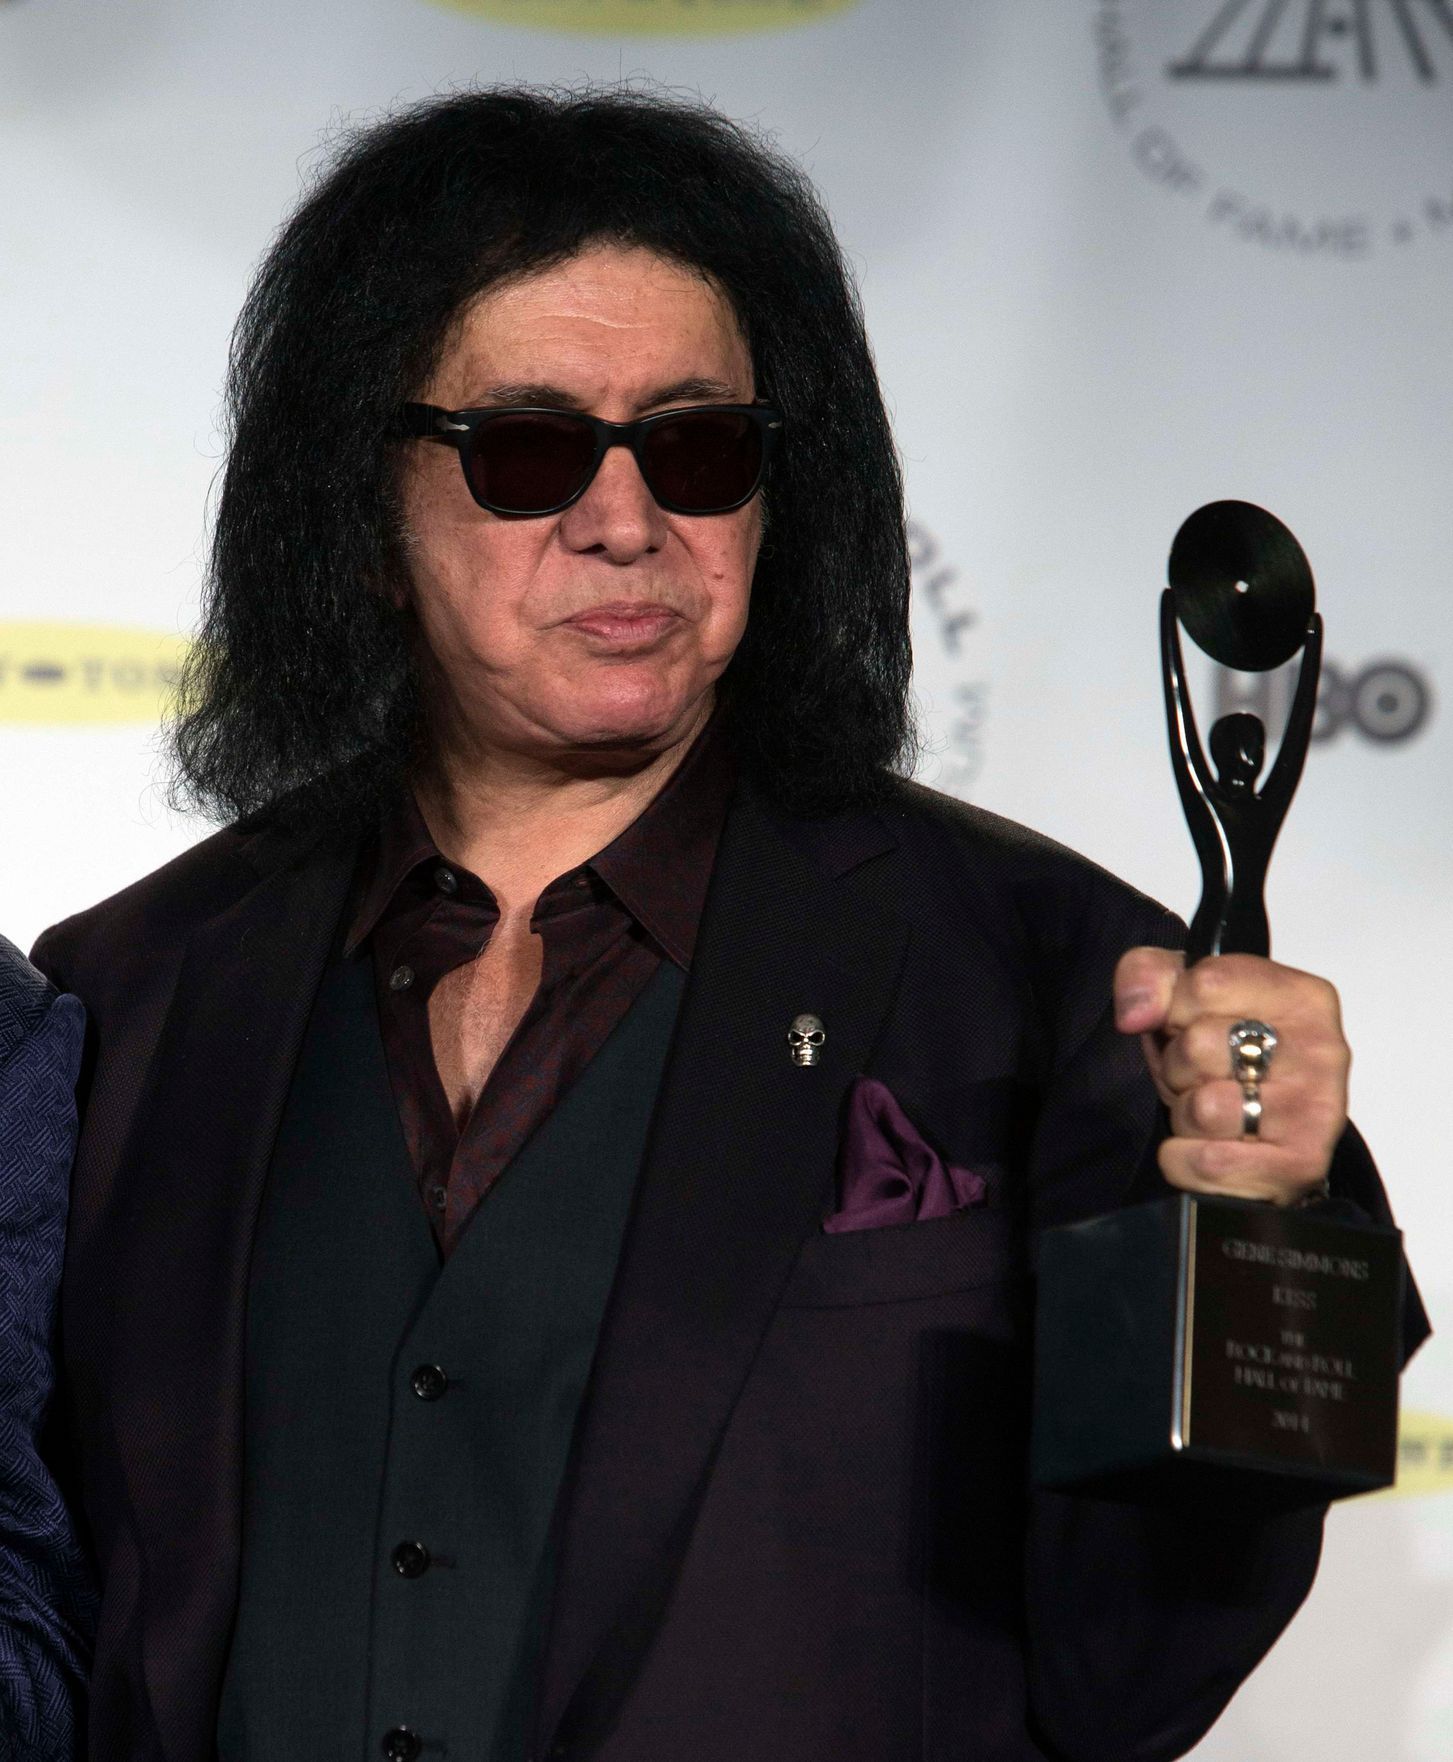 Musician Simmons of rock band Kiss poses for pictures after being inducted at 29th annual Rock and Roll Hall of Fame Induction Ceremony in Brooklyn, New York